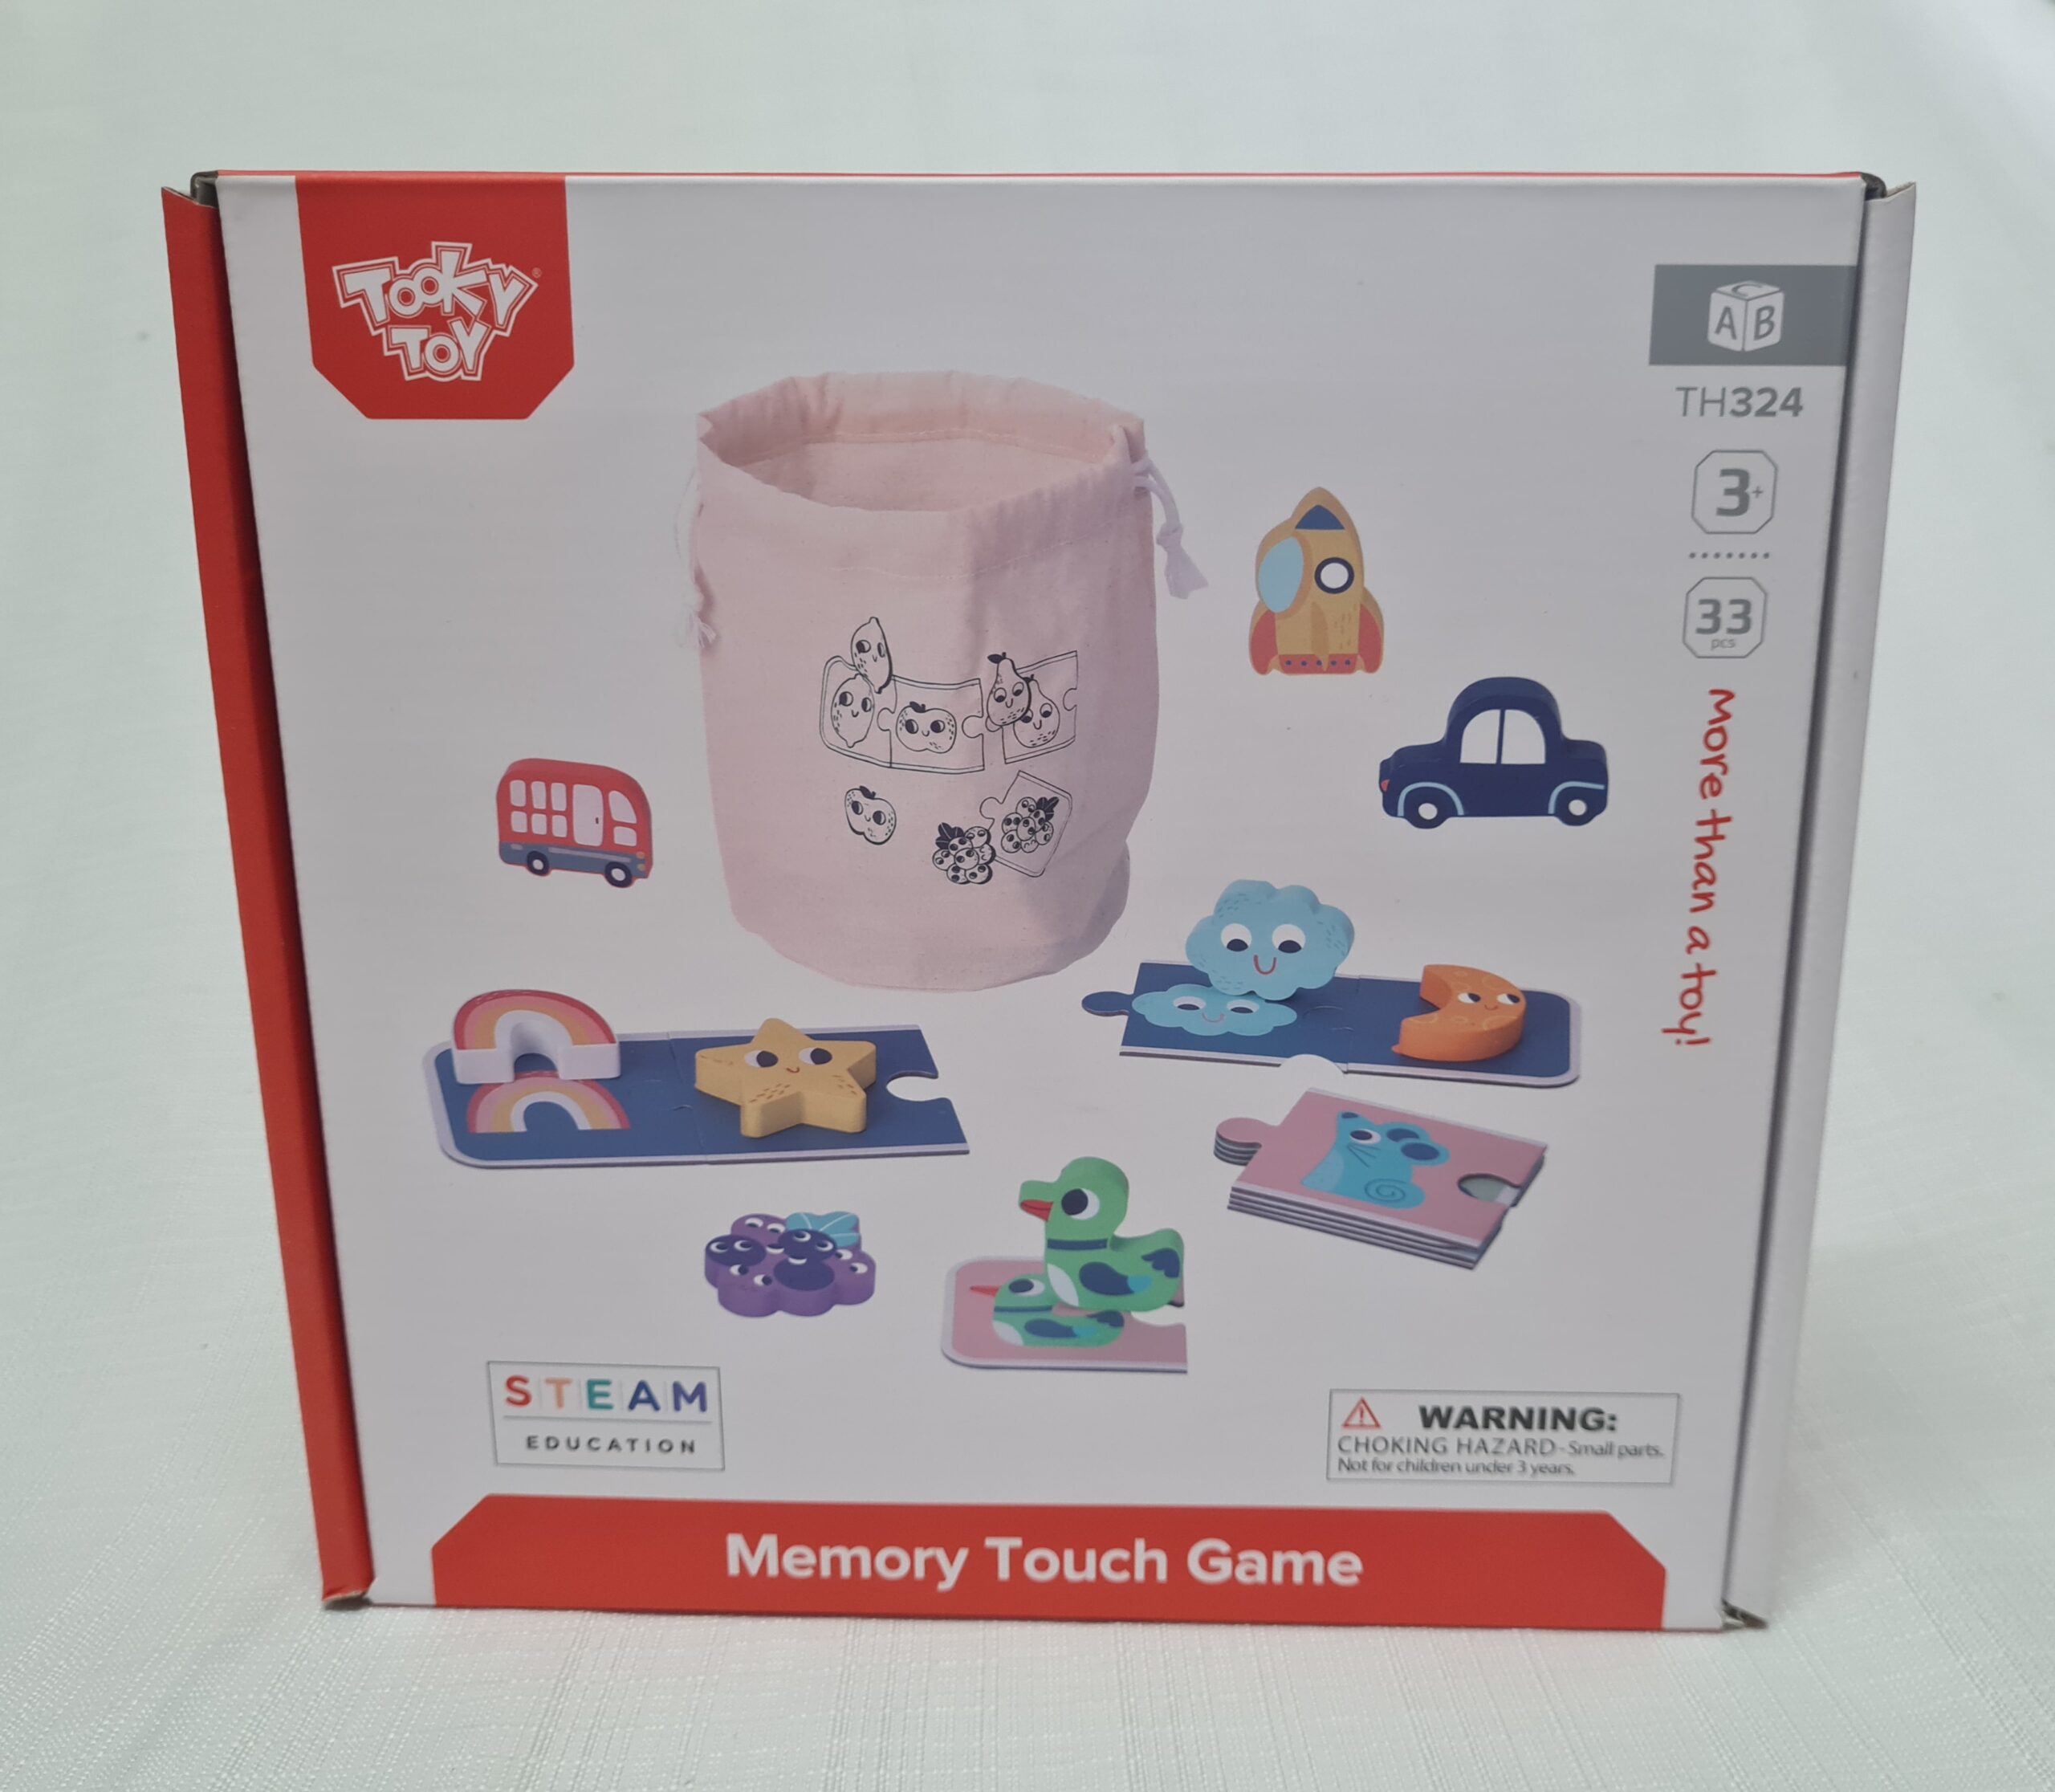 Th324 Tooky Toy MEMORY TOUCH GAME first memory match game for toddlers